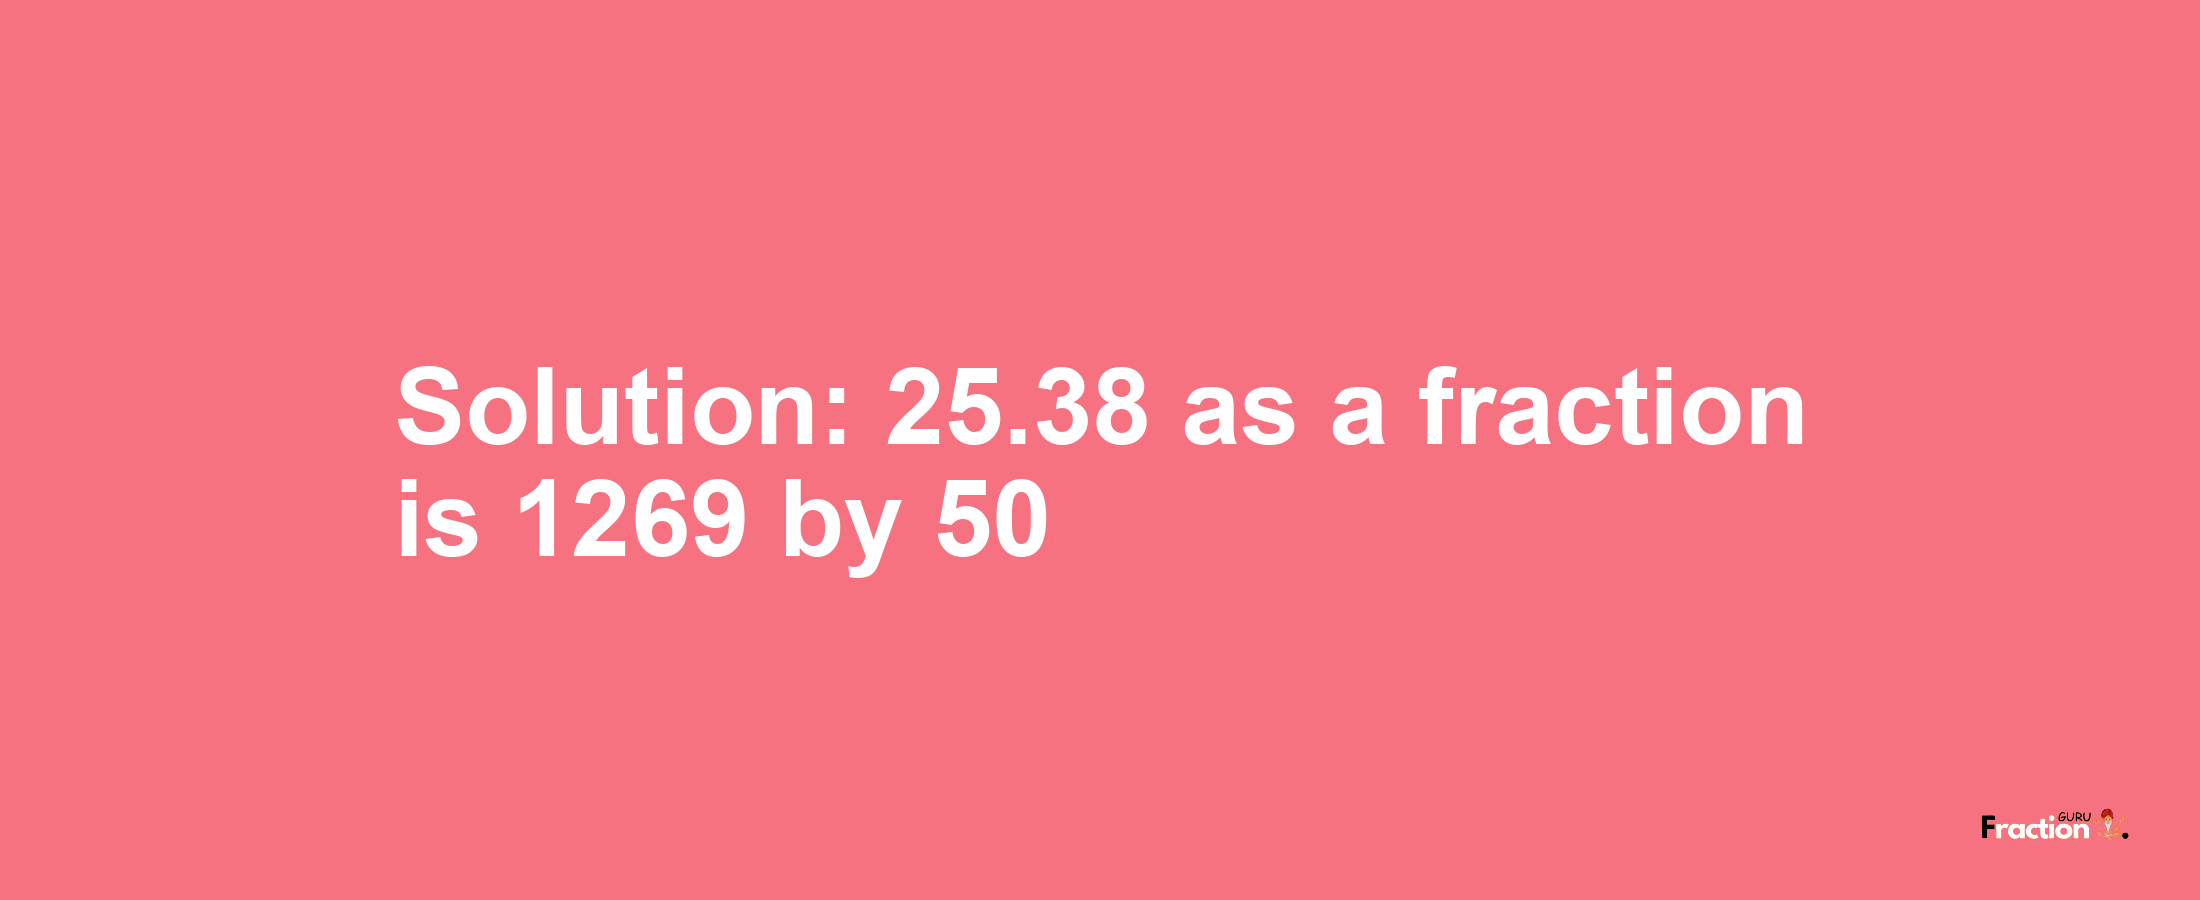 Solution:25.38 as a fraction is 1269/50